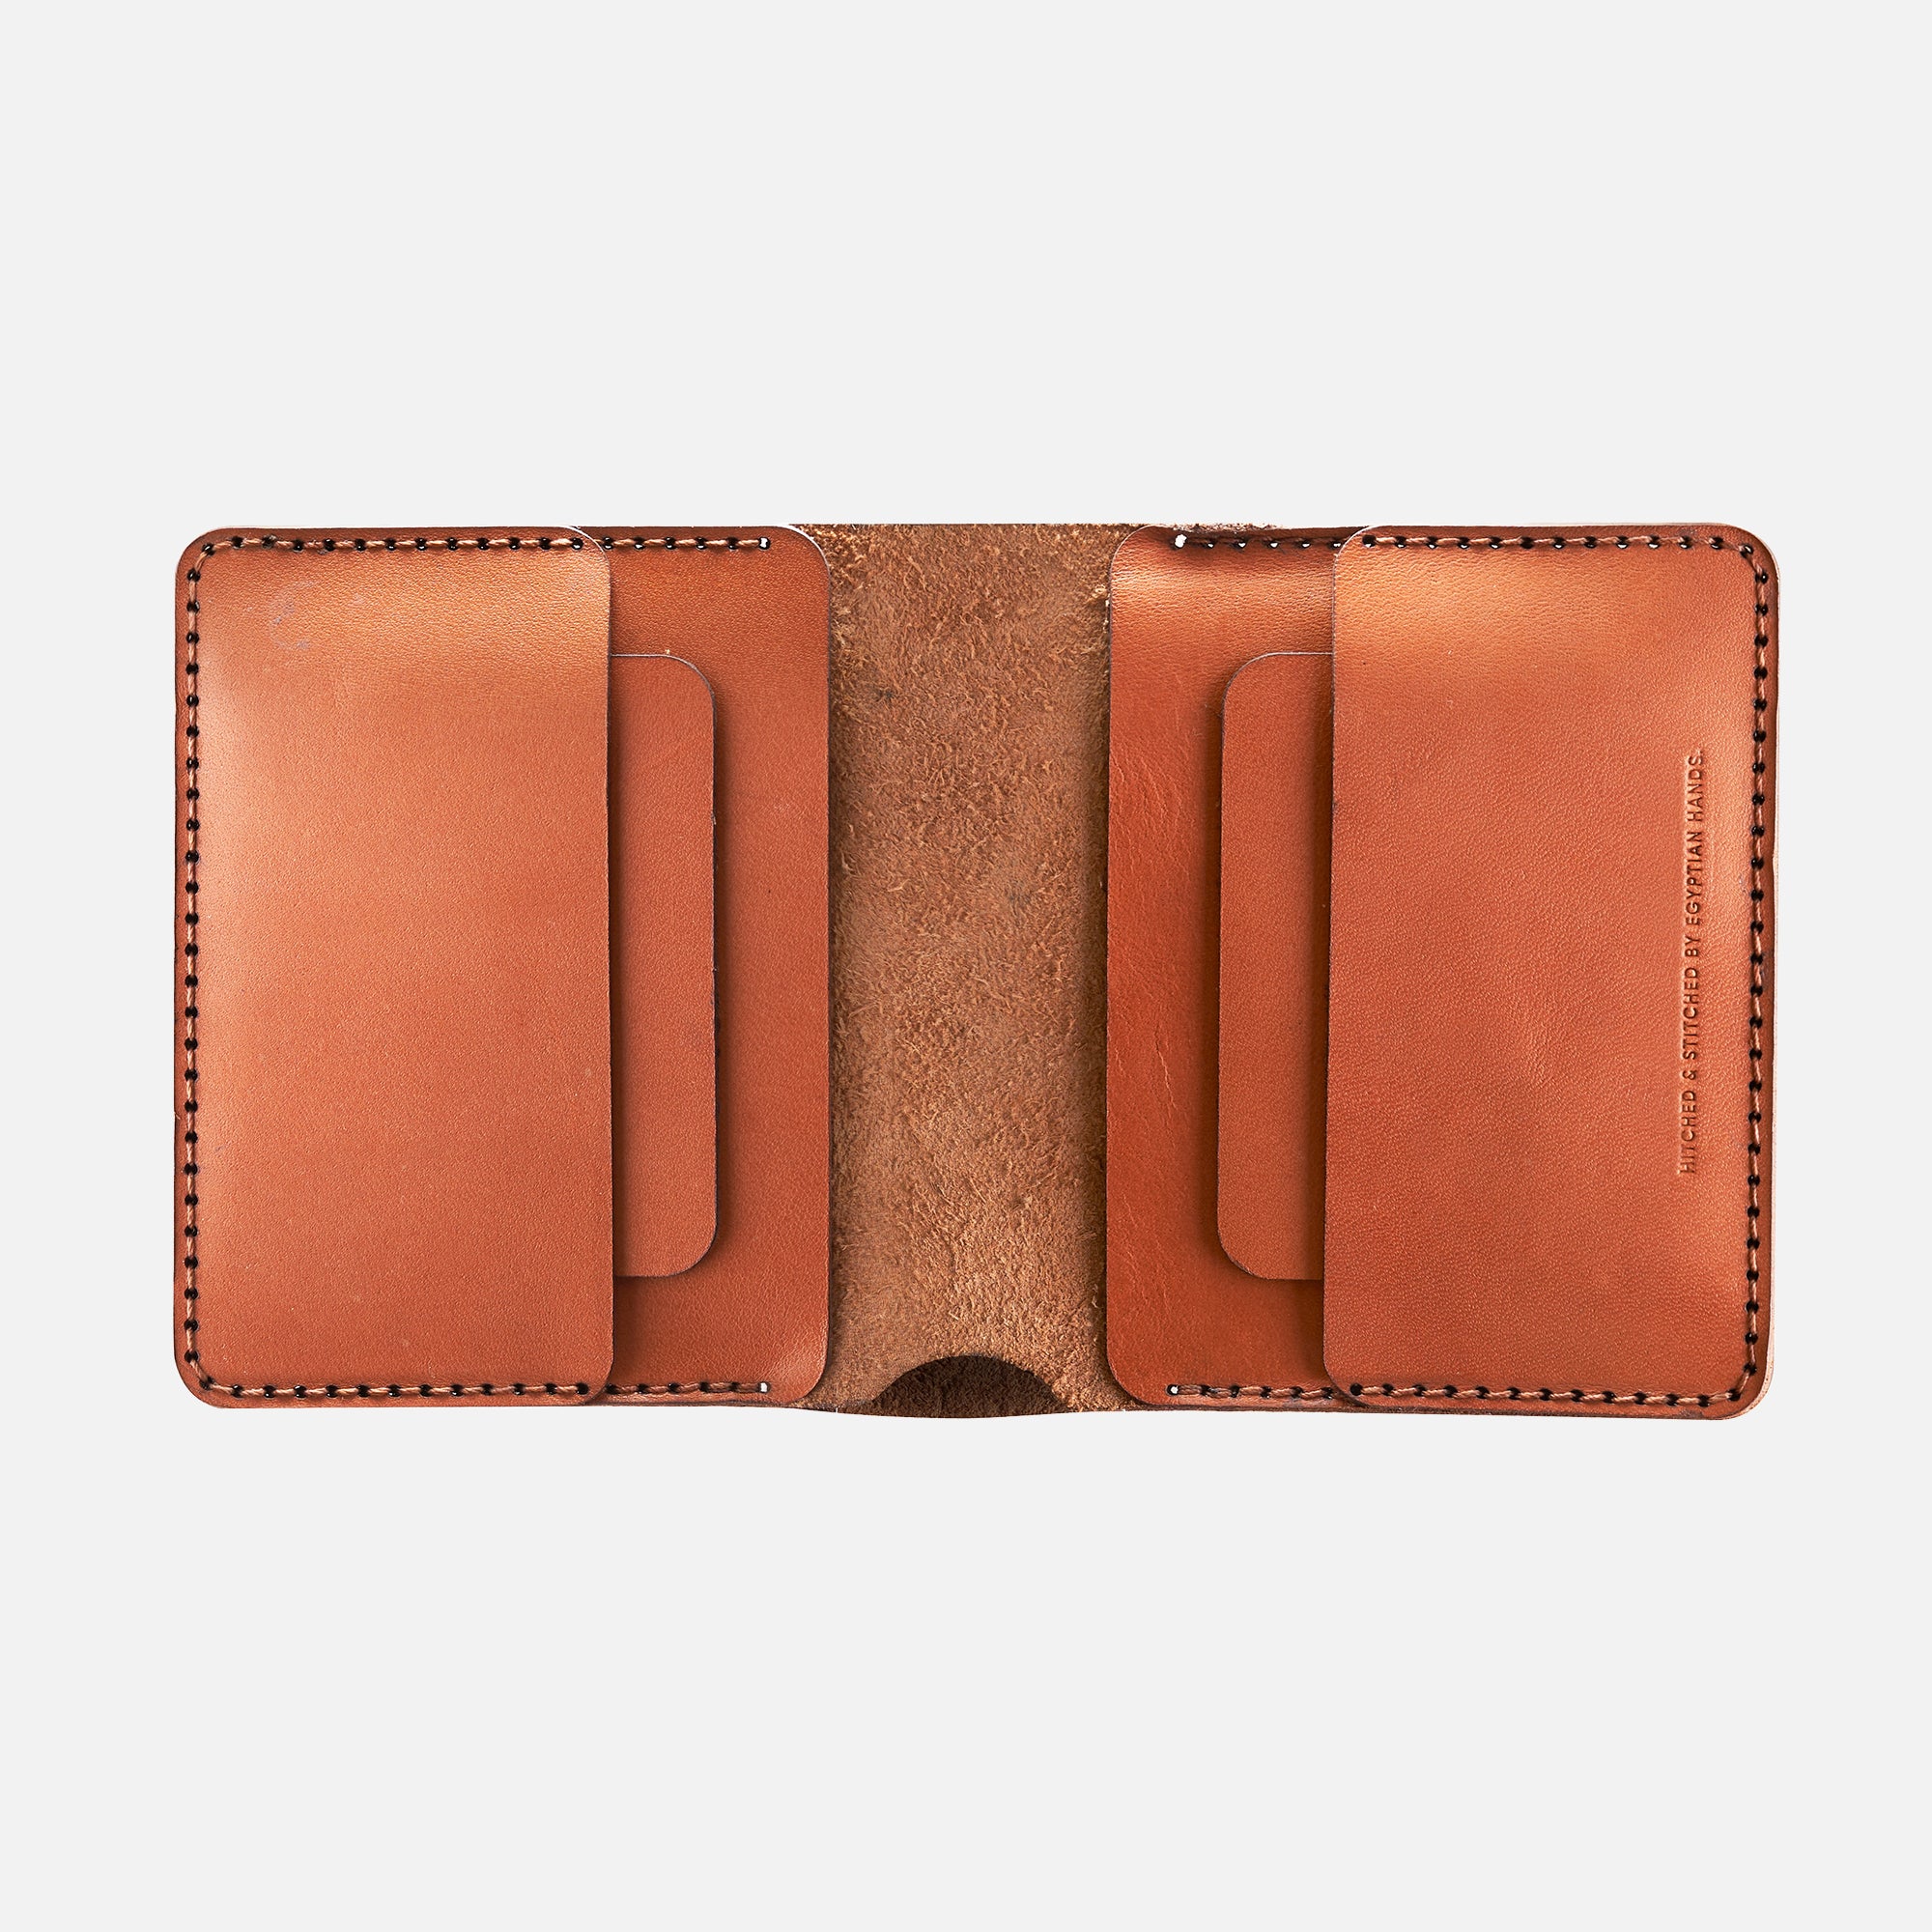 Open brown leather bifold wallet showing card slots, top stitch detailing, isolated on a white background.